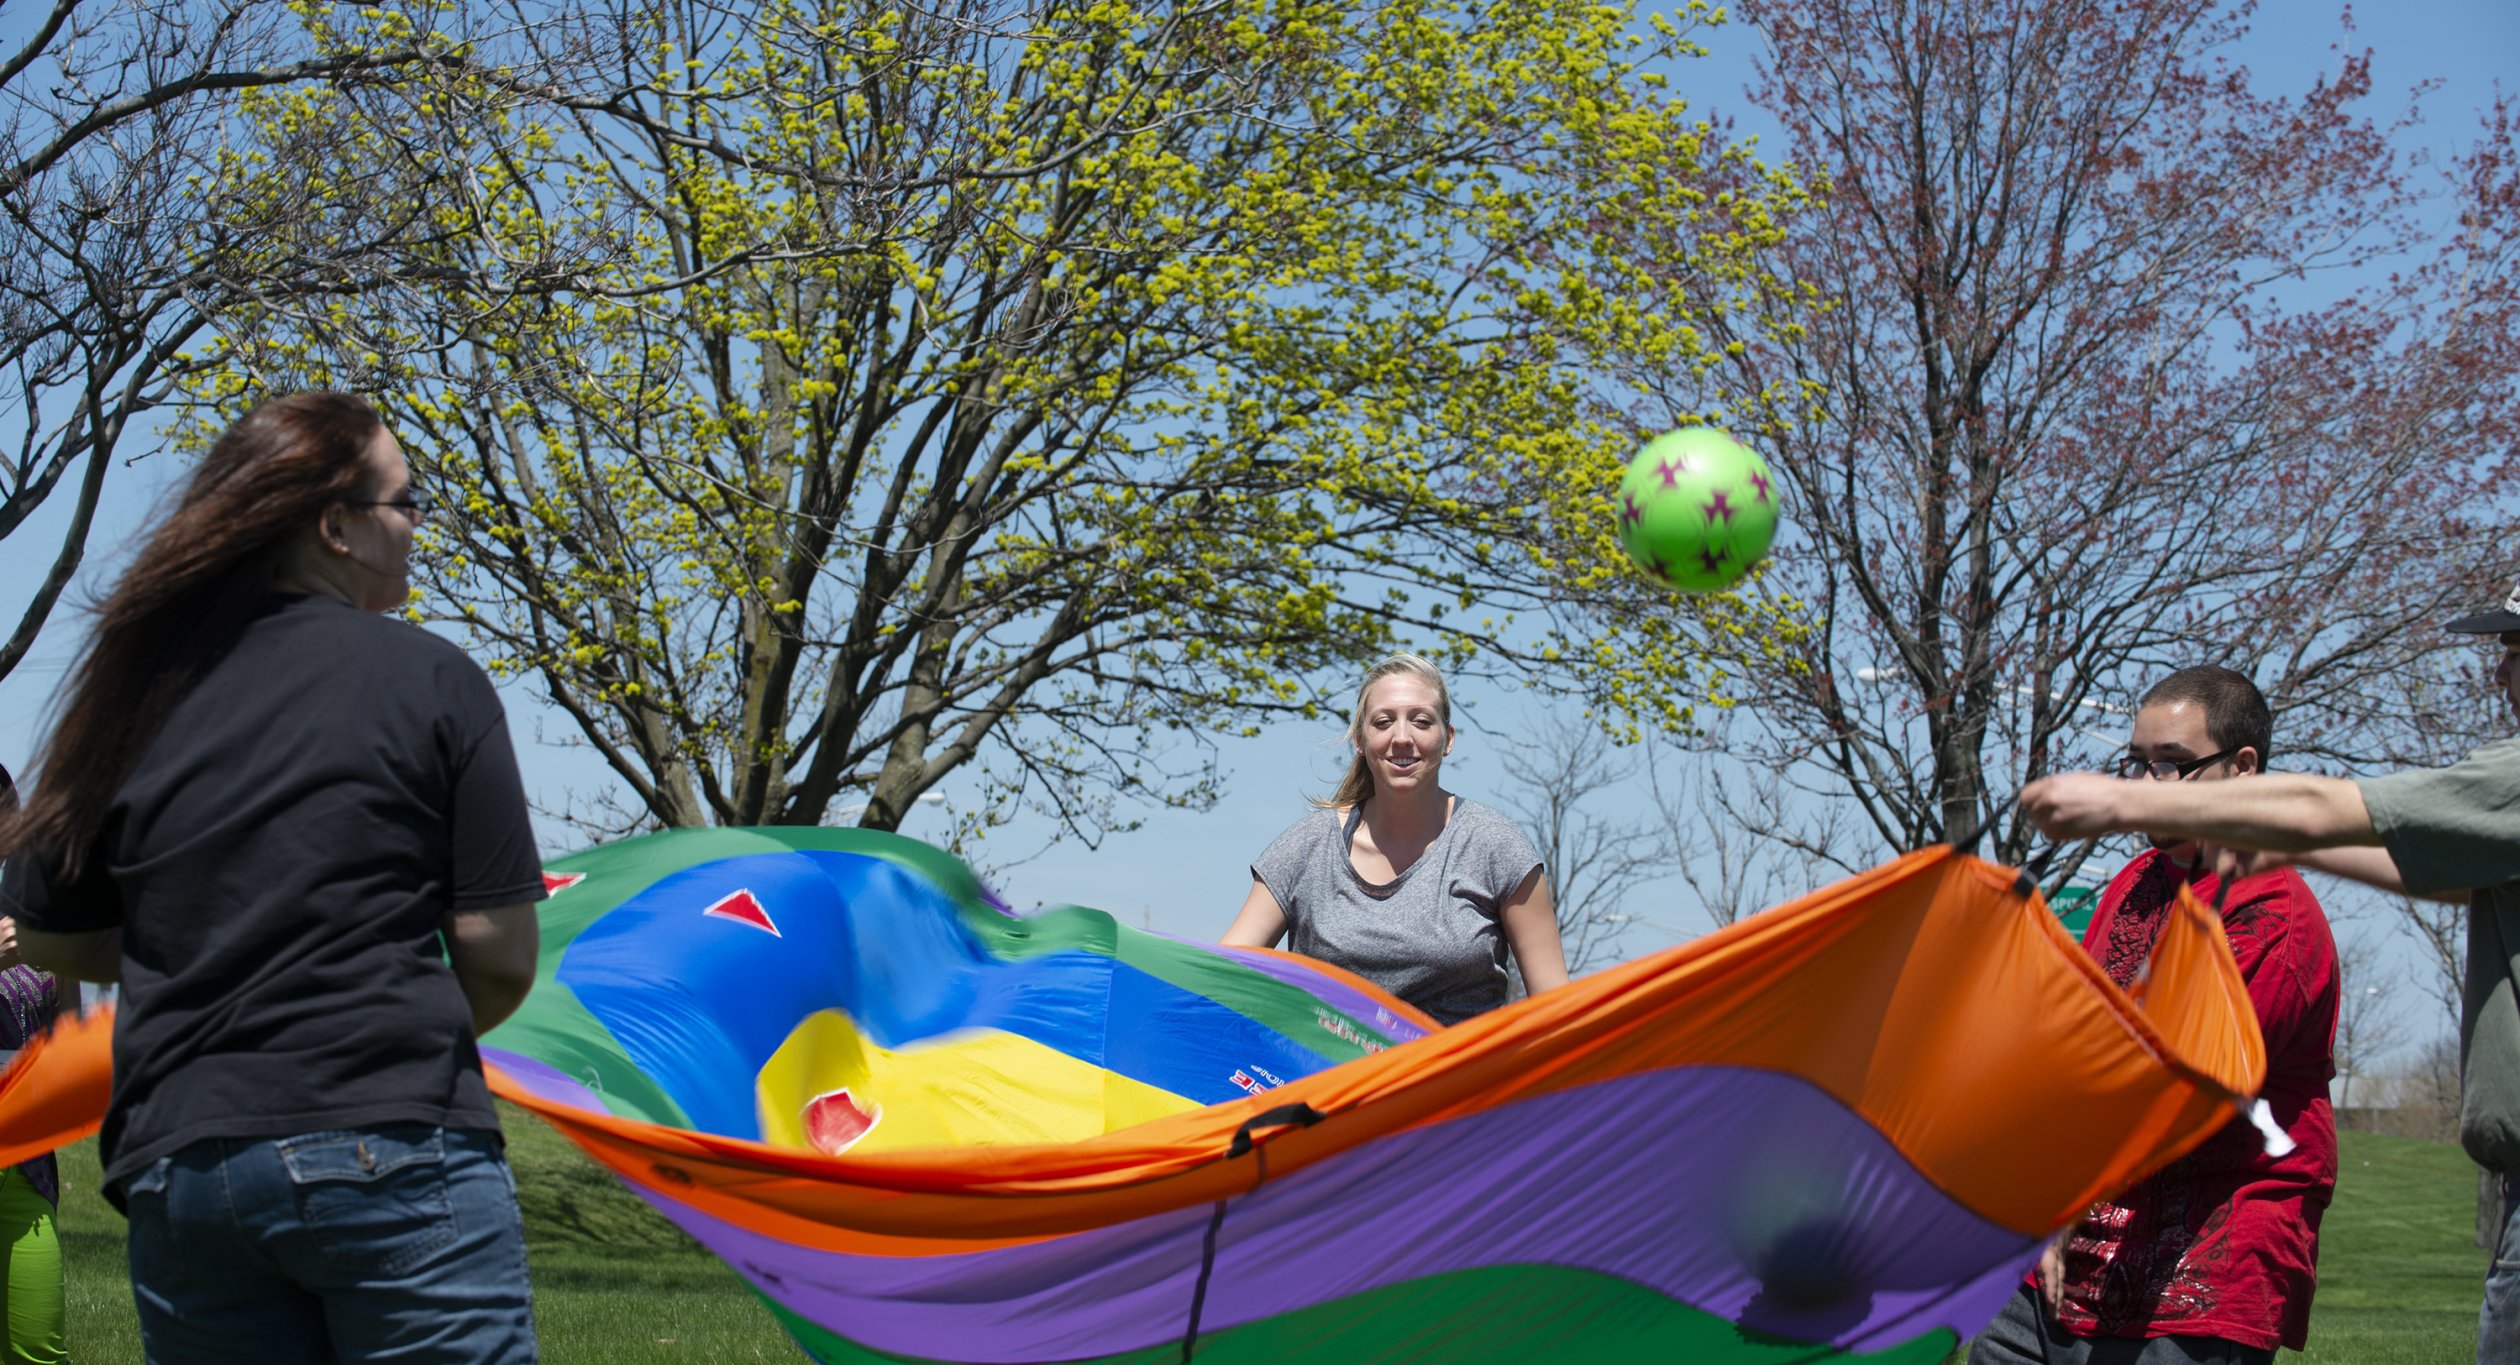 Occupational Therapy students at work with parachute and ball.